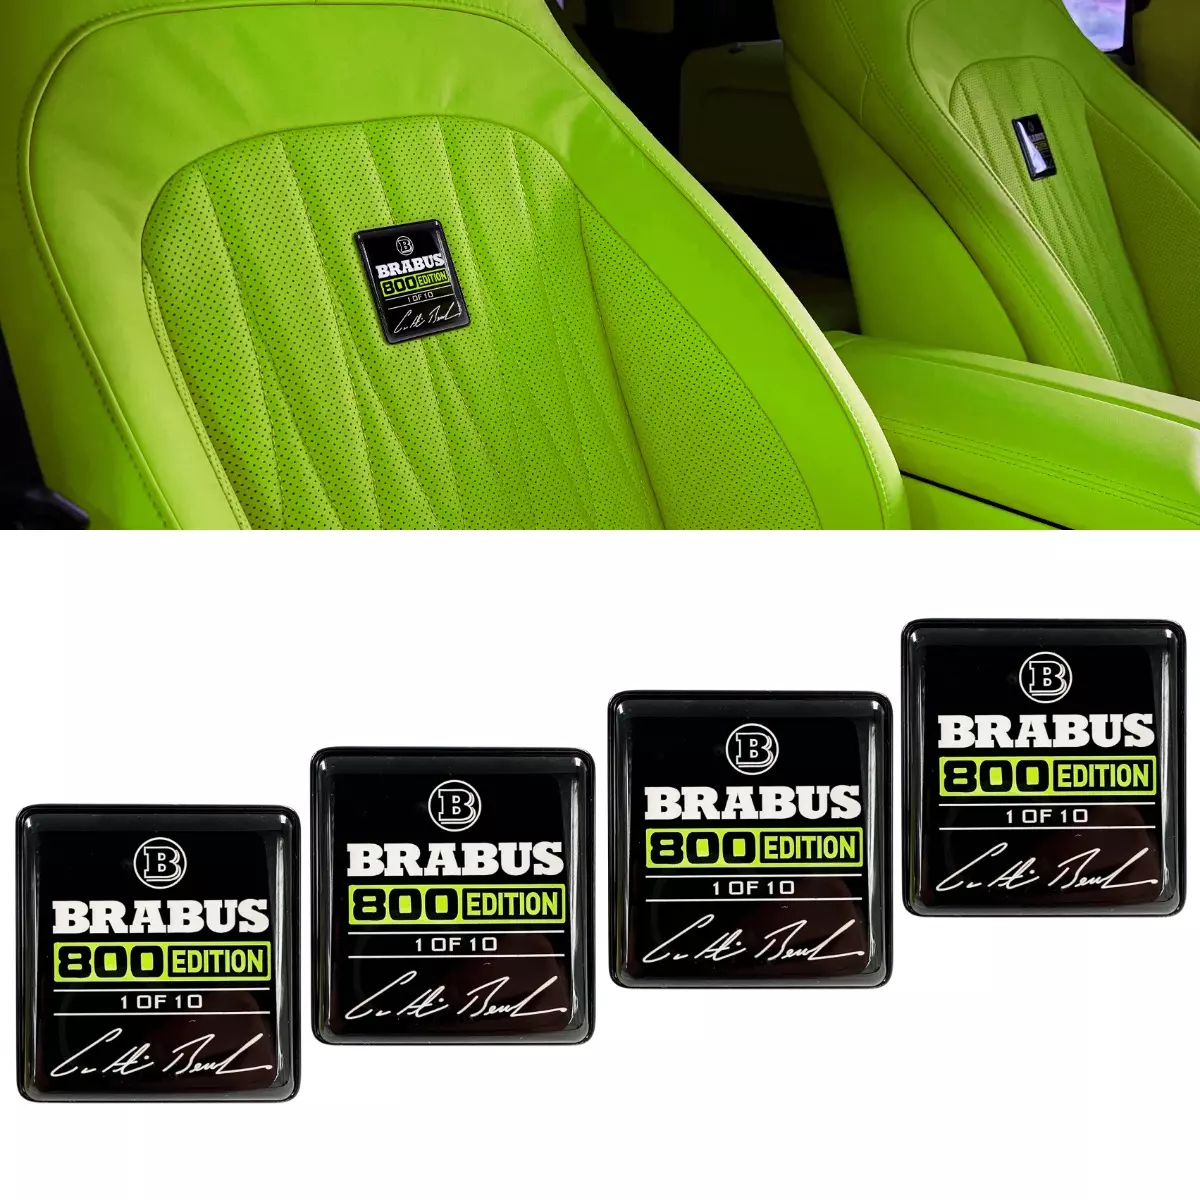 Brabus 800 Edition 1 of 10 Green Seat Emblems Set for Mercedes-Benz W463A